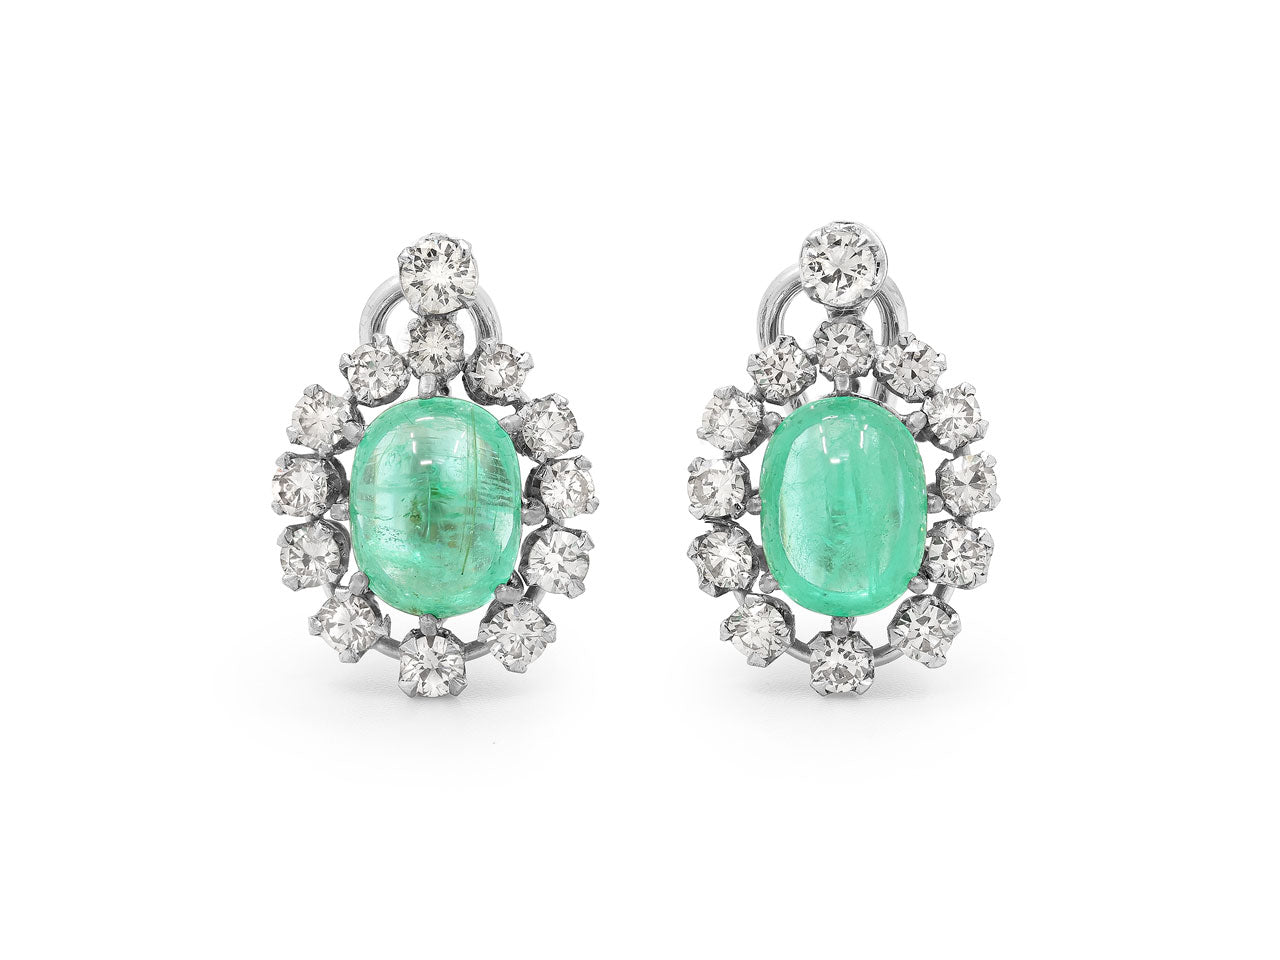 Cabochon Emerald and Diamond Earrings in Platinum